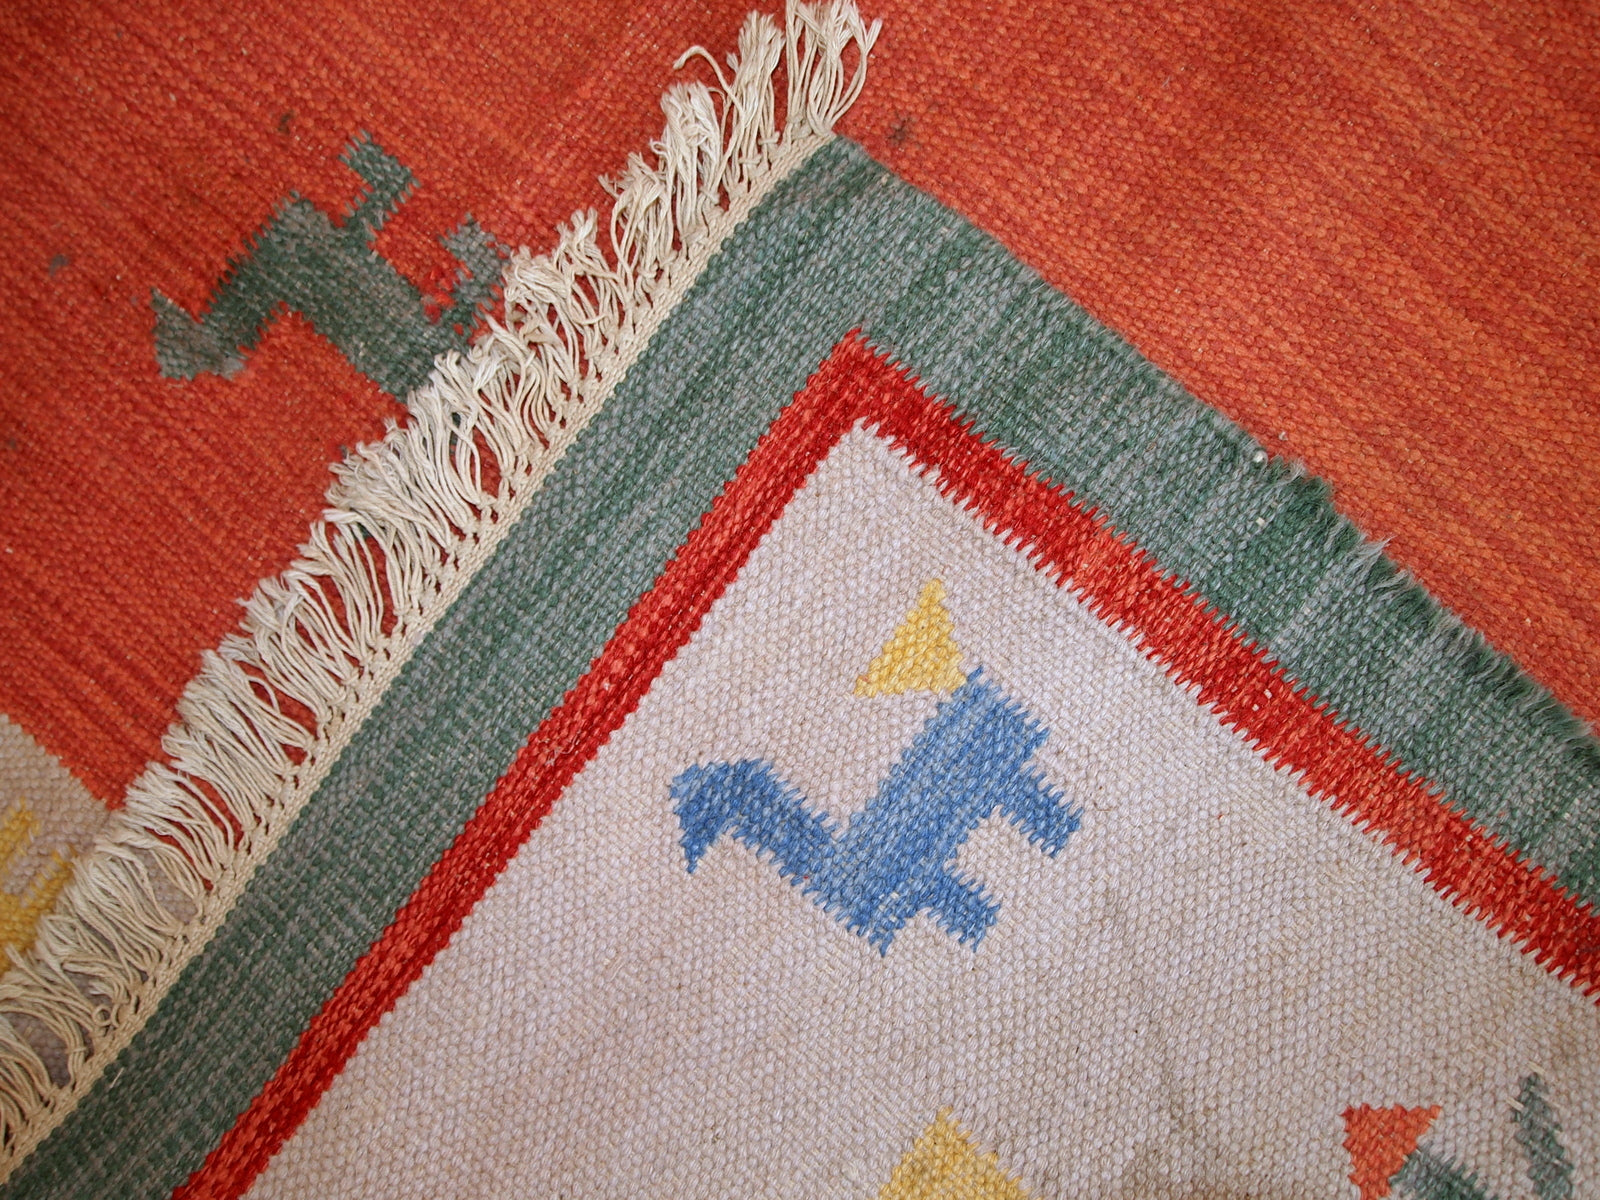 Vintage Persian kilim in bright shades of red, sky blue, beige and yellow. One side of the kilim has some age wear, but generally it is in original good condition.